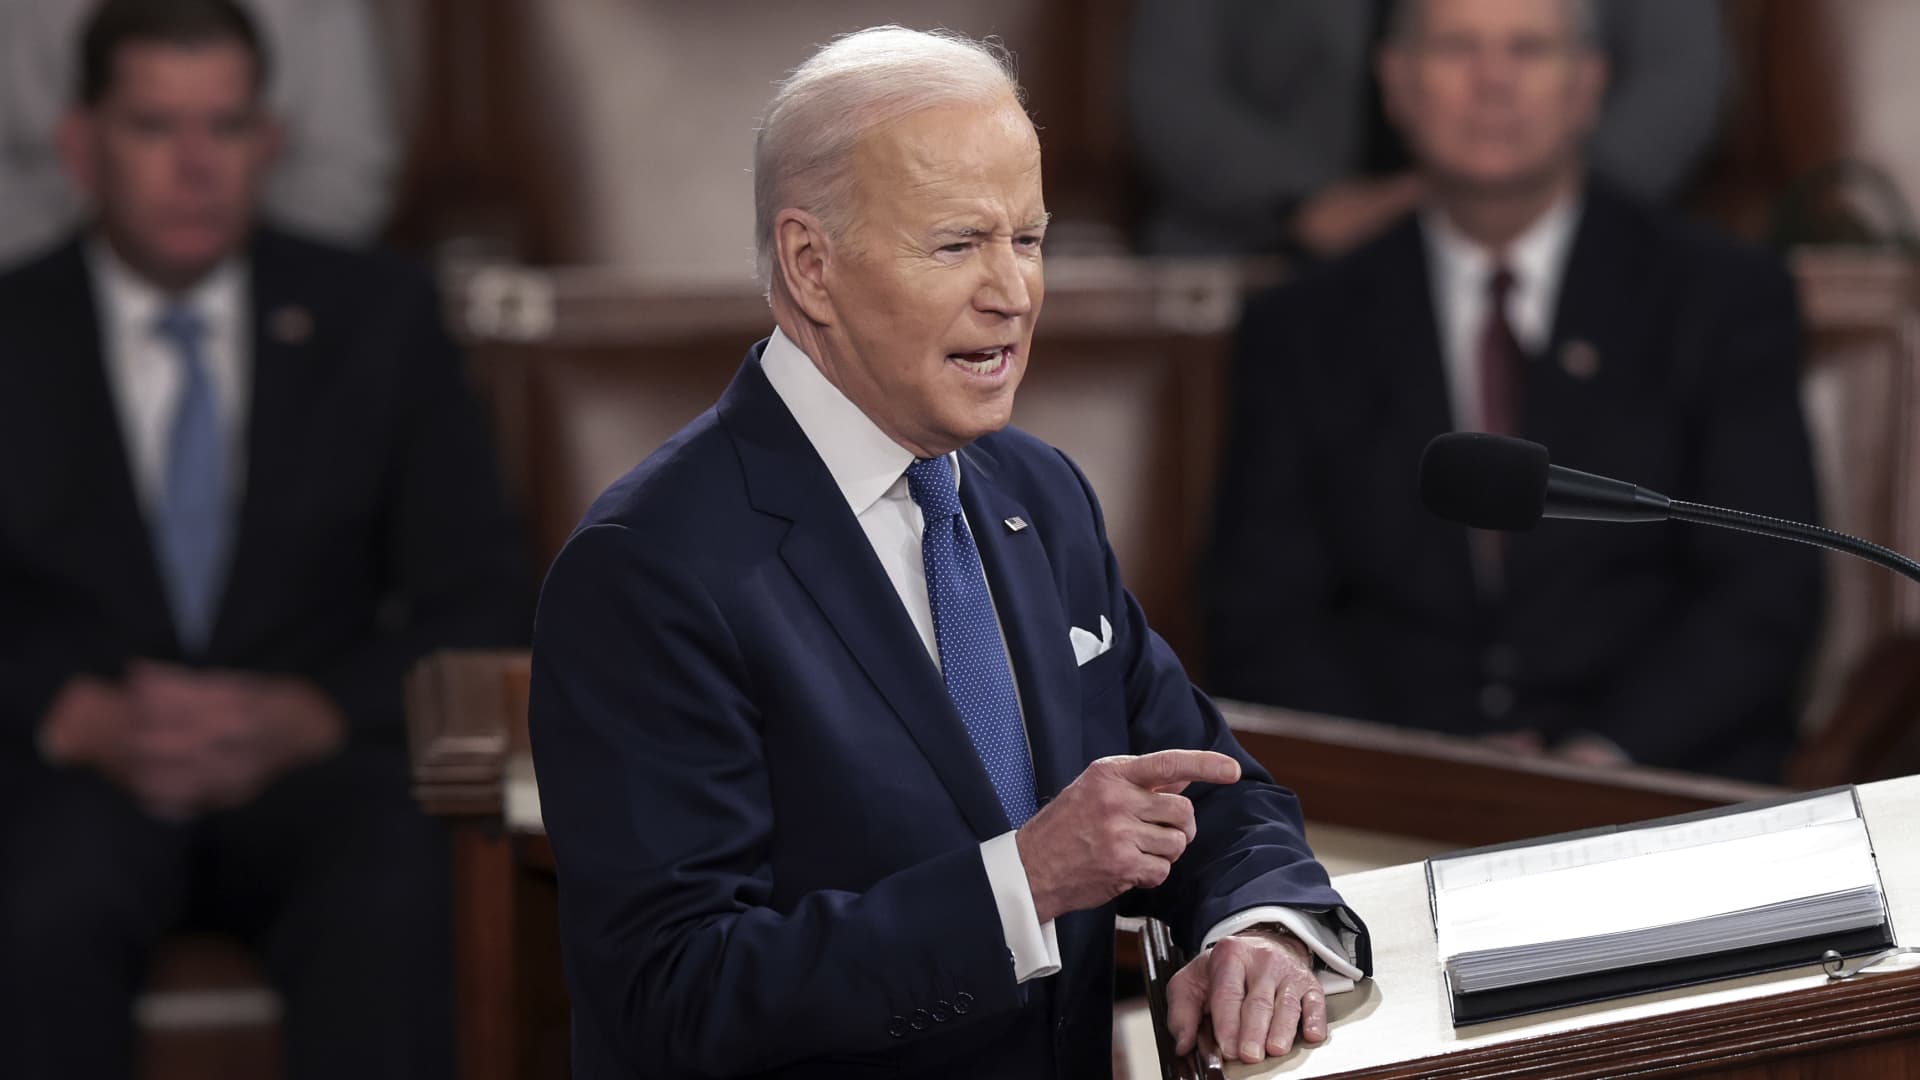 Biden to ask for 'billionaire minimum tax' again in State of the Union